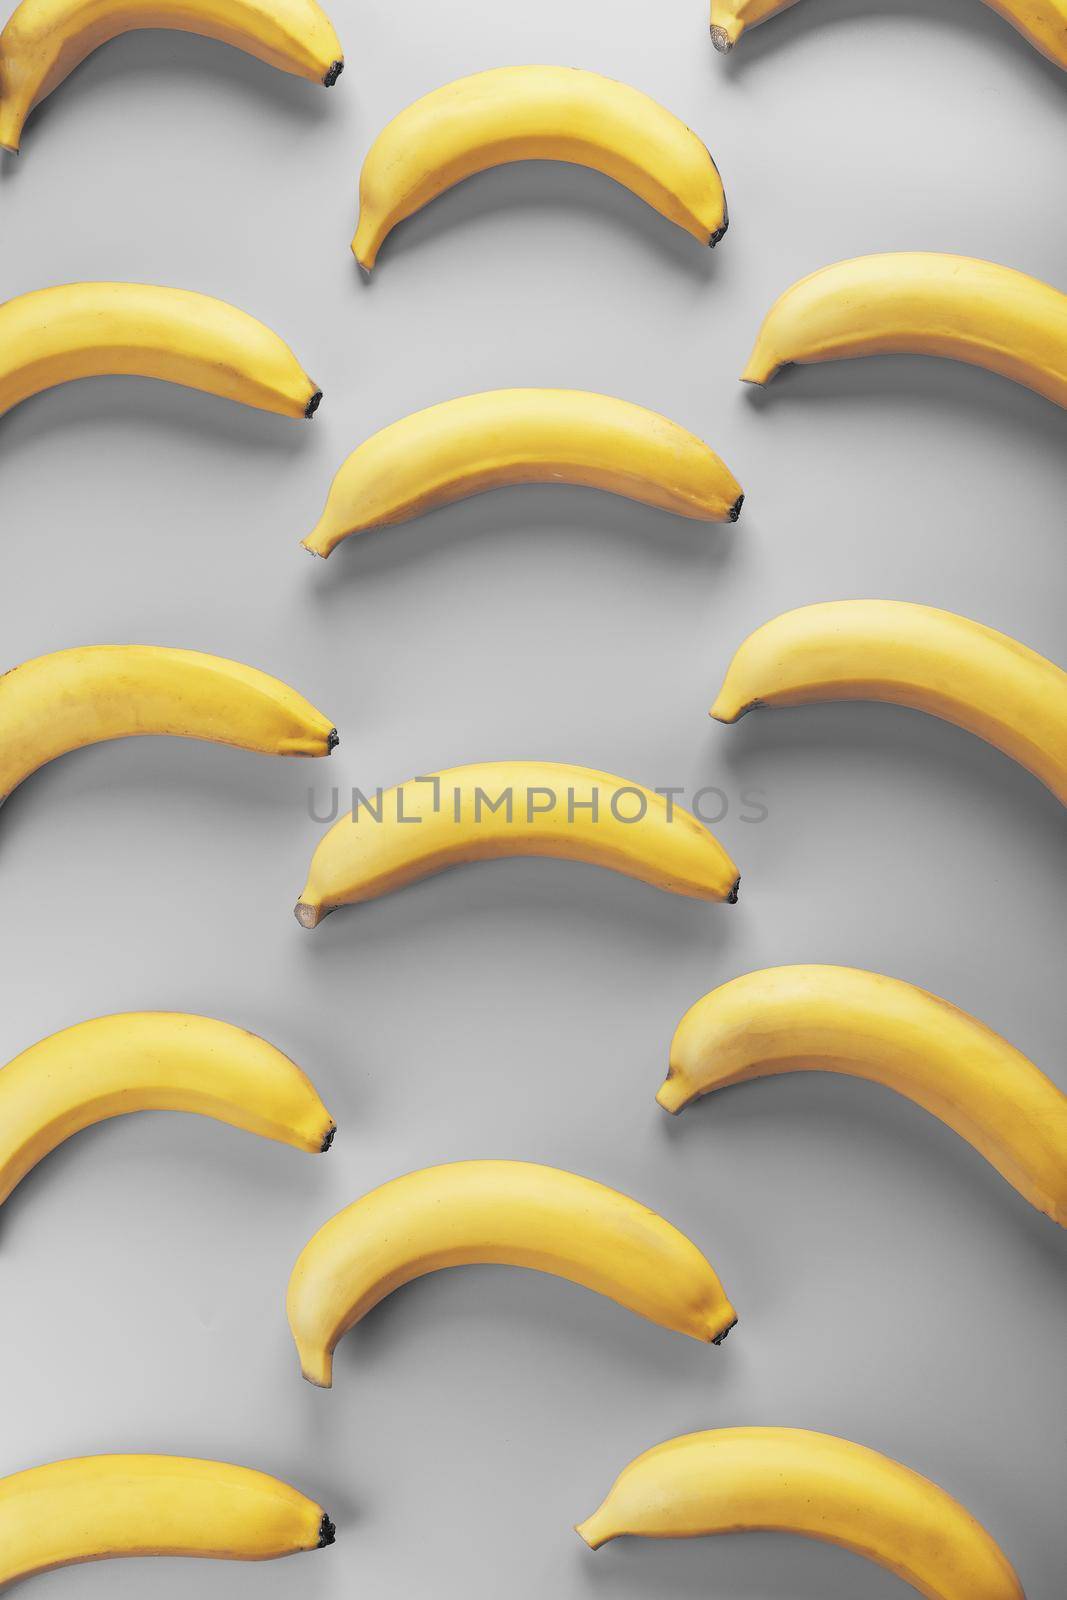 Geometric pattern of yellow bananas on a gray background in the Fashionable colors of 2021. by AlexGrec